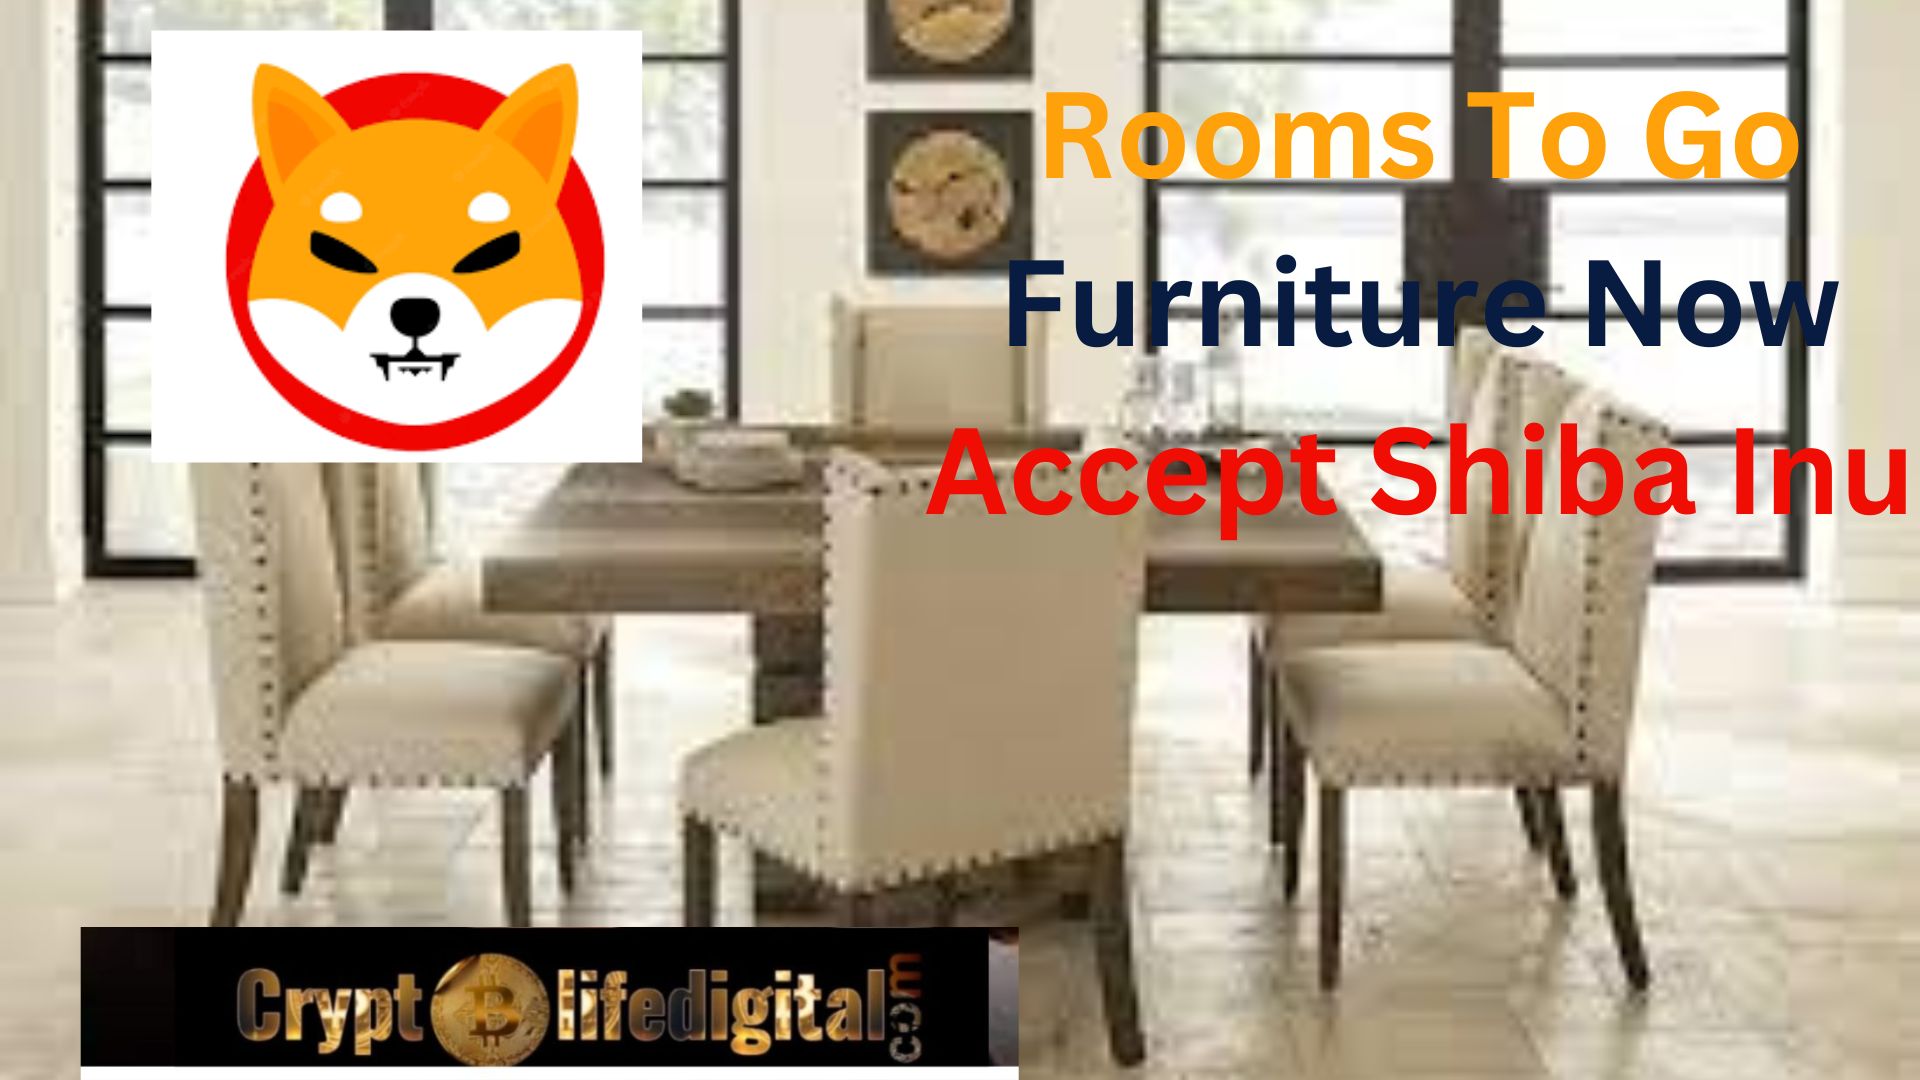 United State-Based Furniture Company, Rooms To Go, Now Accept Shiba Inu As A Mode Of Payment Via BitPay